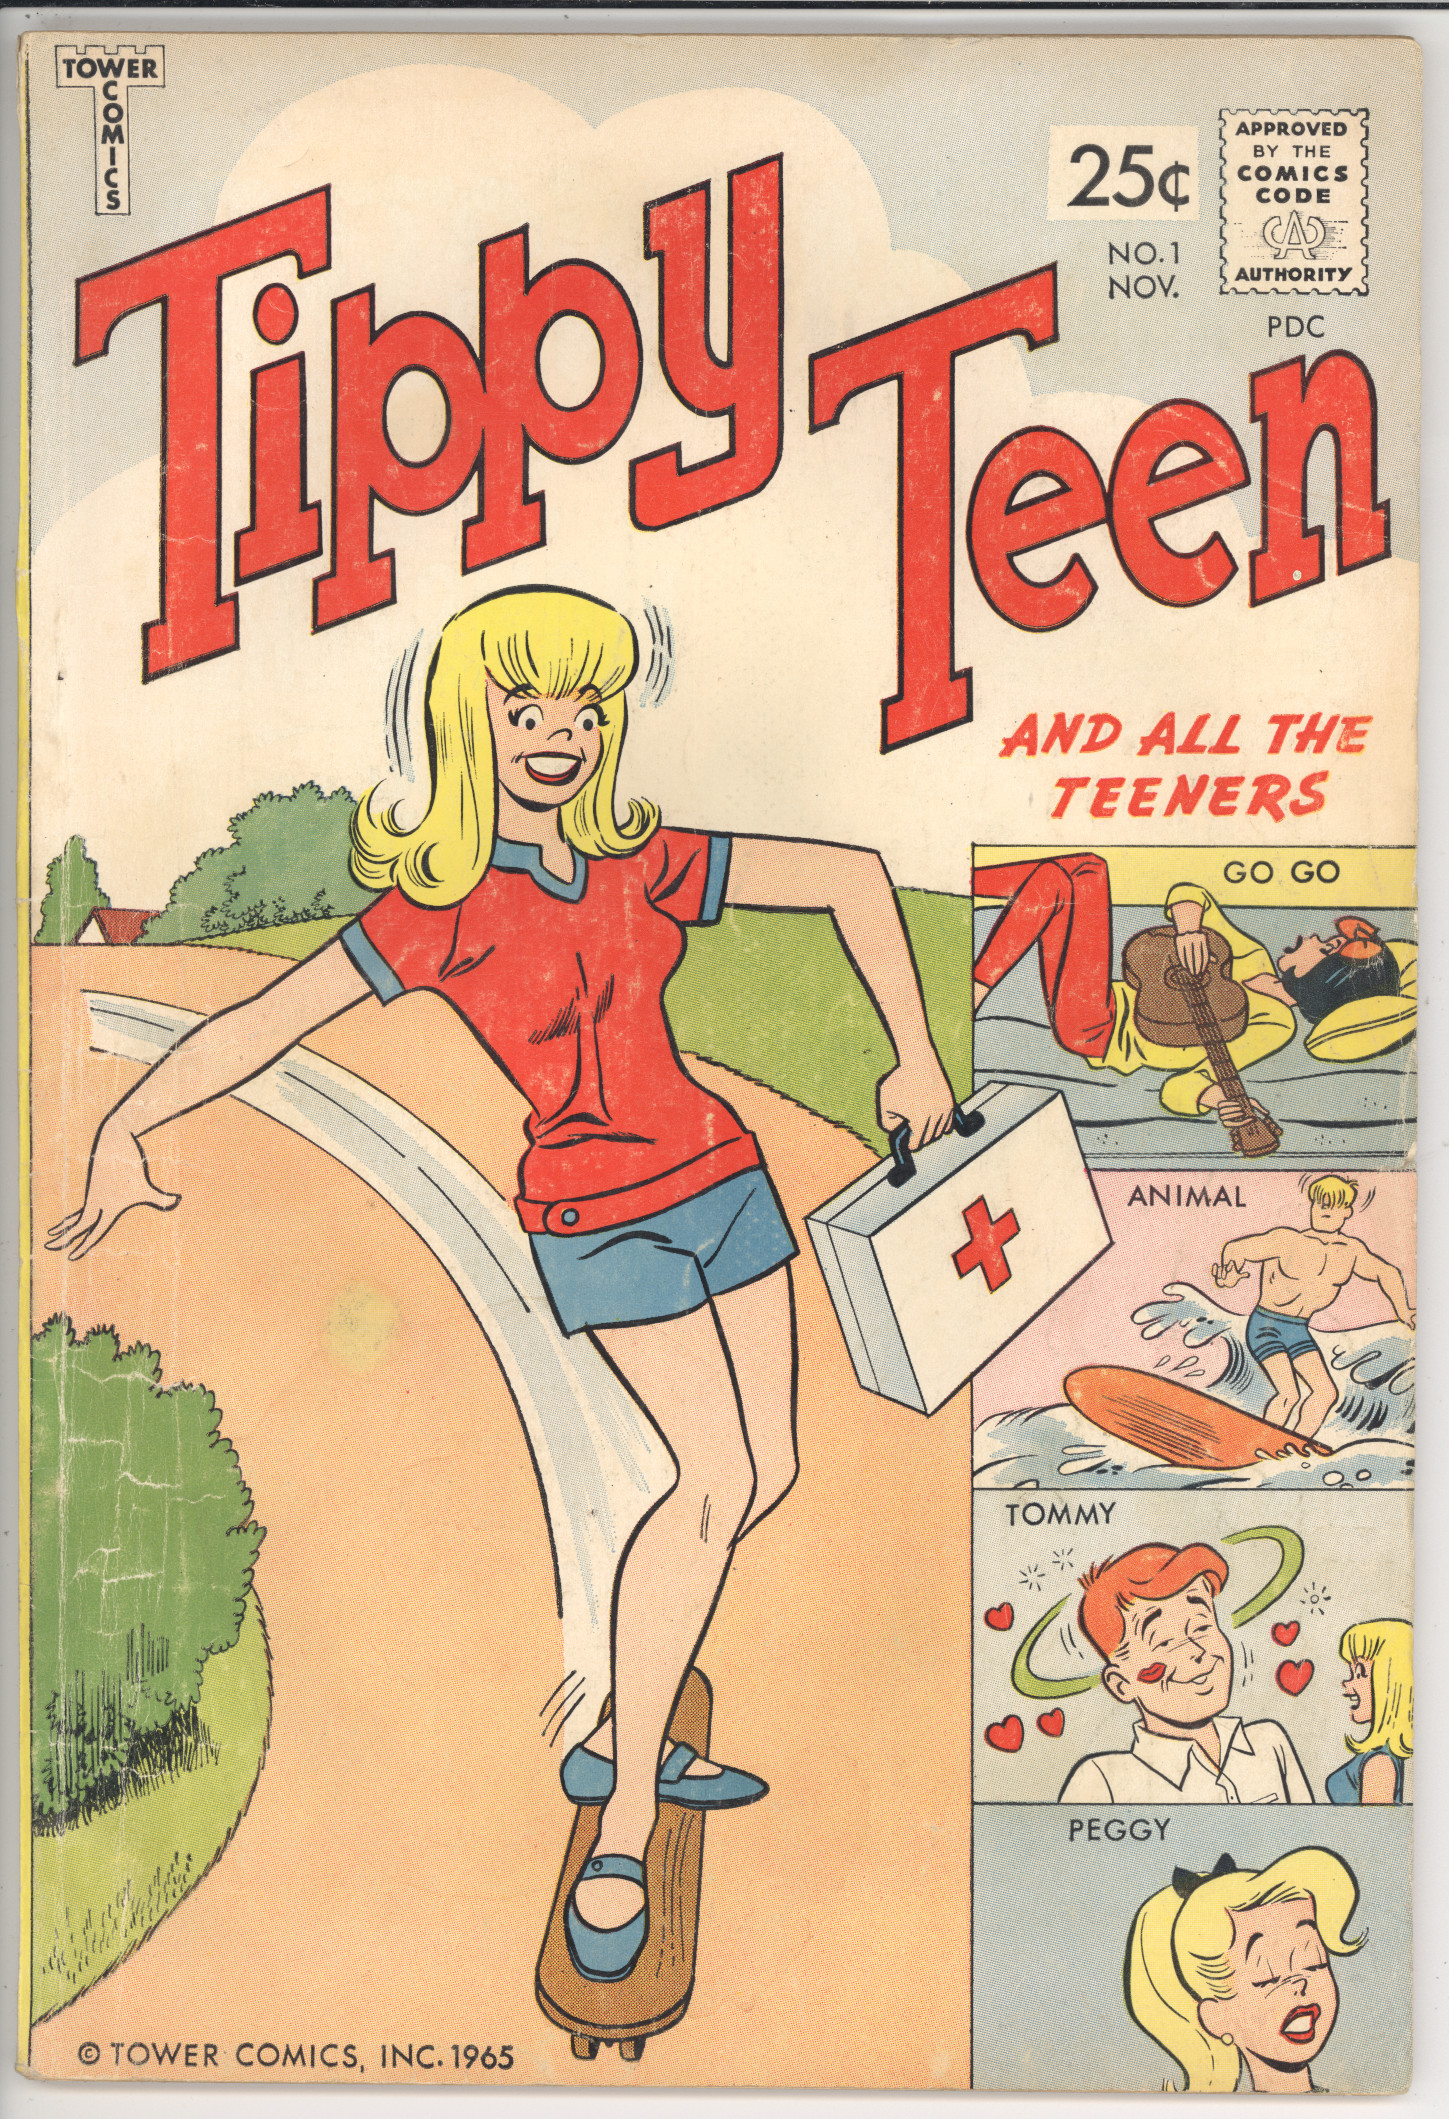 Tippy Teen #1 front